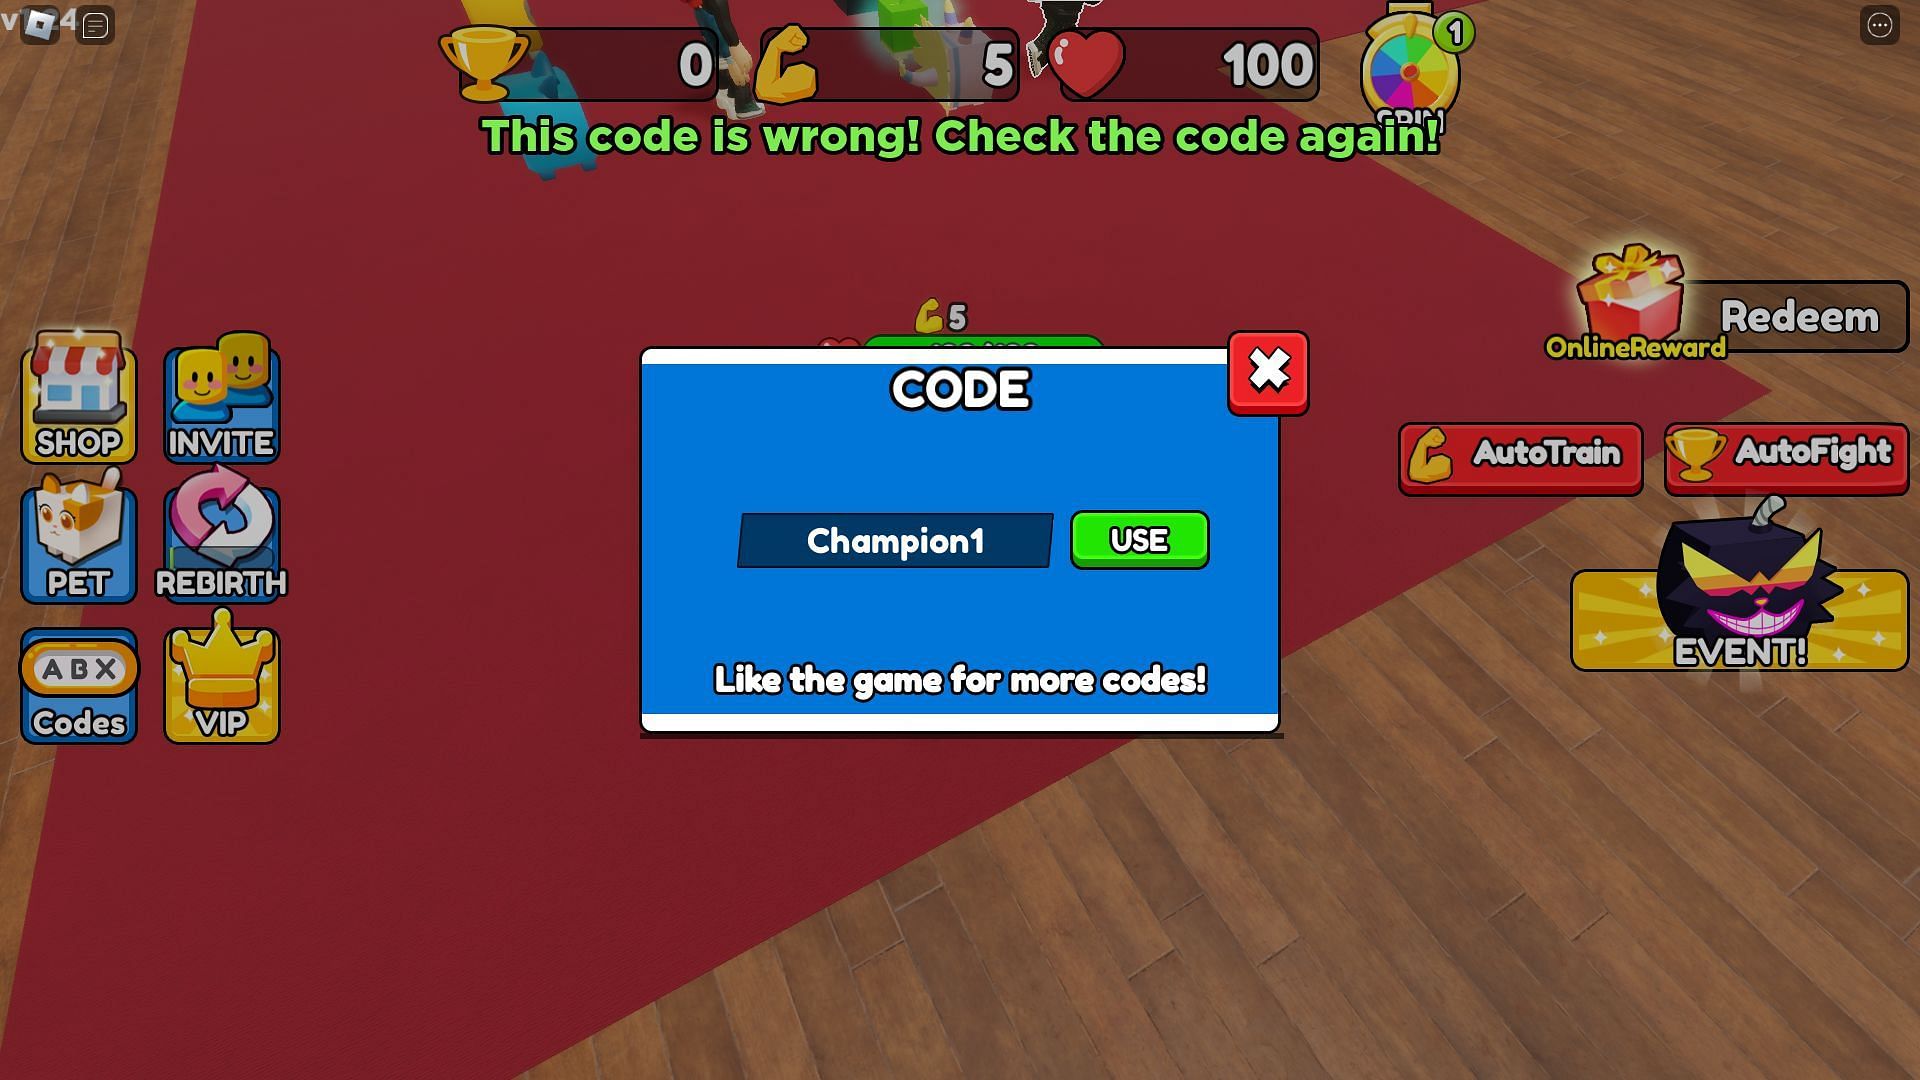 Troubleshooting codes for Boxing Star Simulator (Image via Roblox)